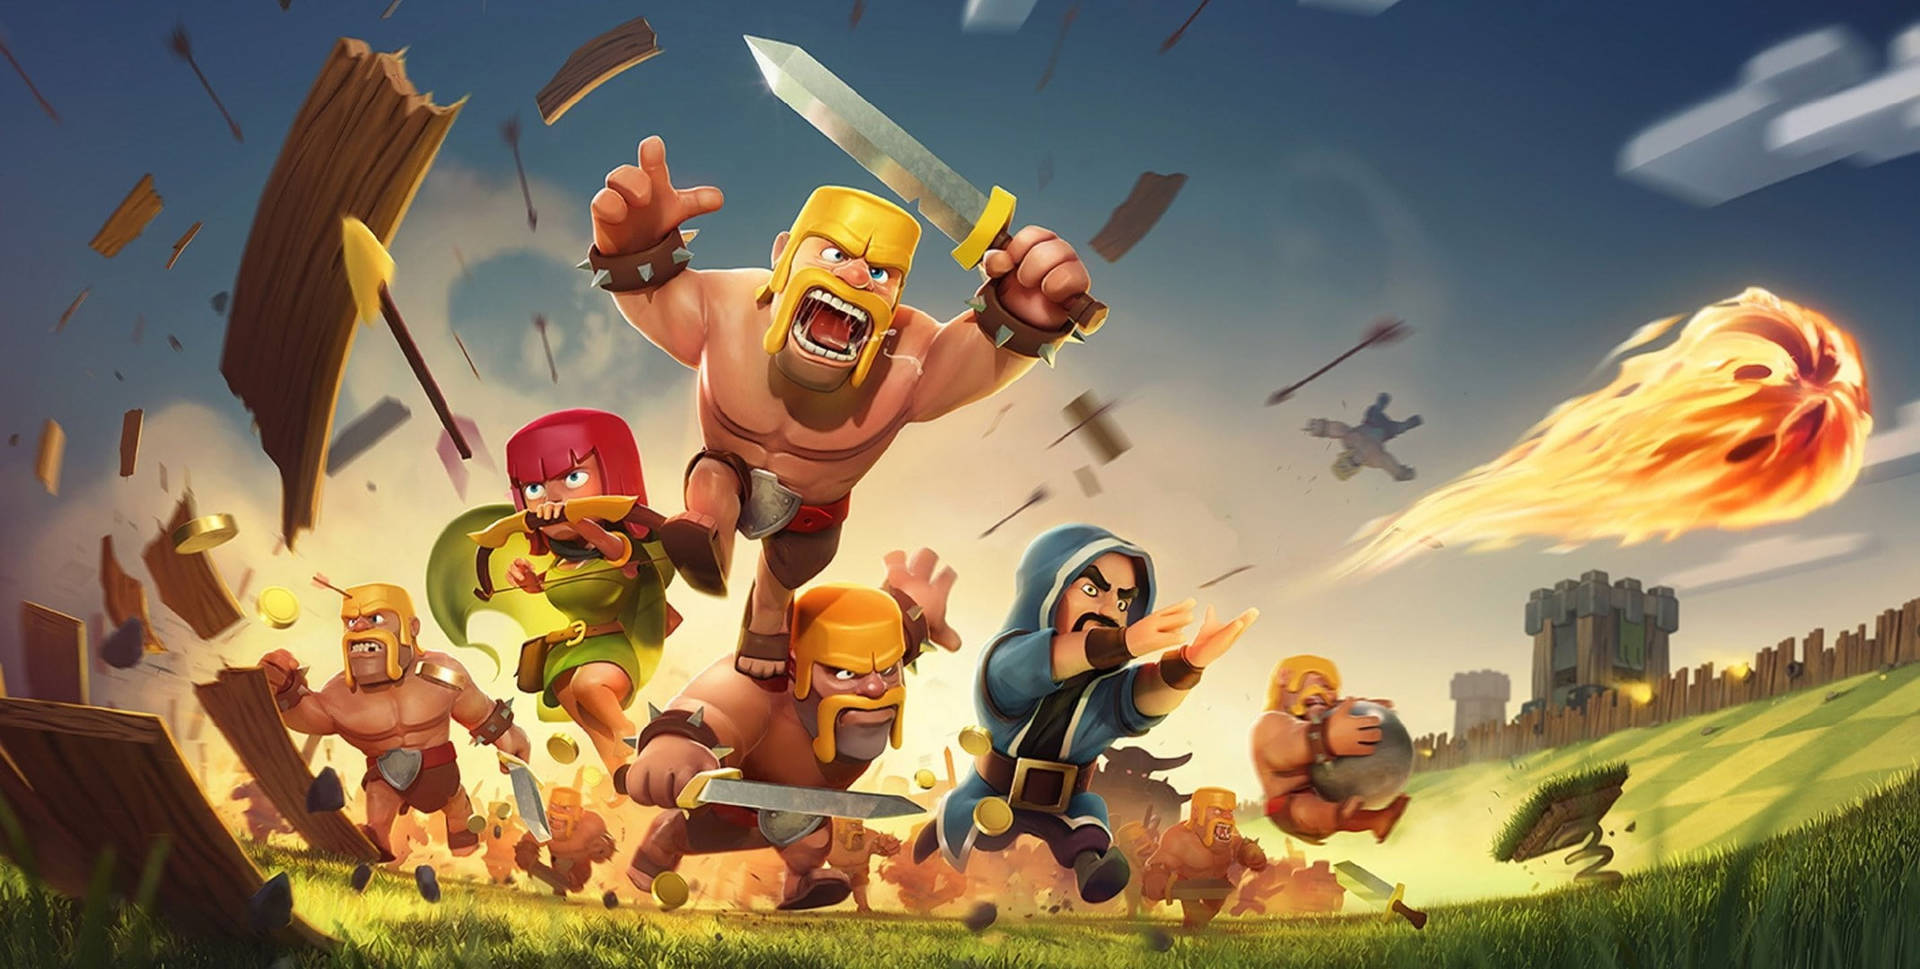 Free Clash Of Clans Wallpaper Downloads, [100+] Clash Of Clans Wallpapers  for FREE 